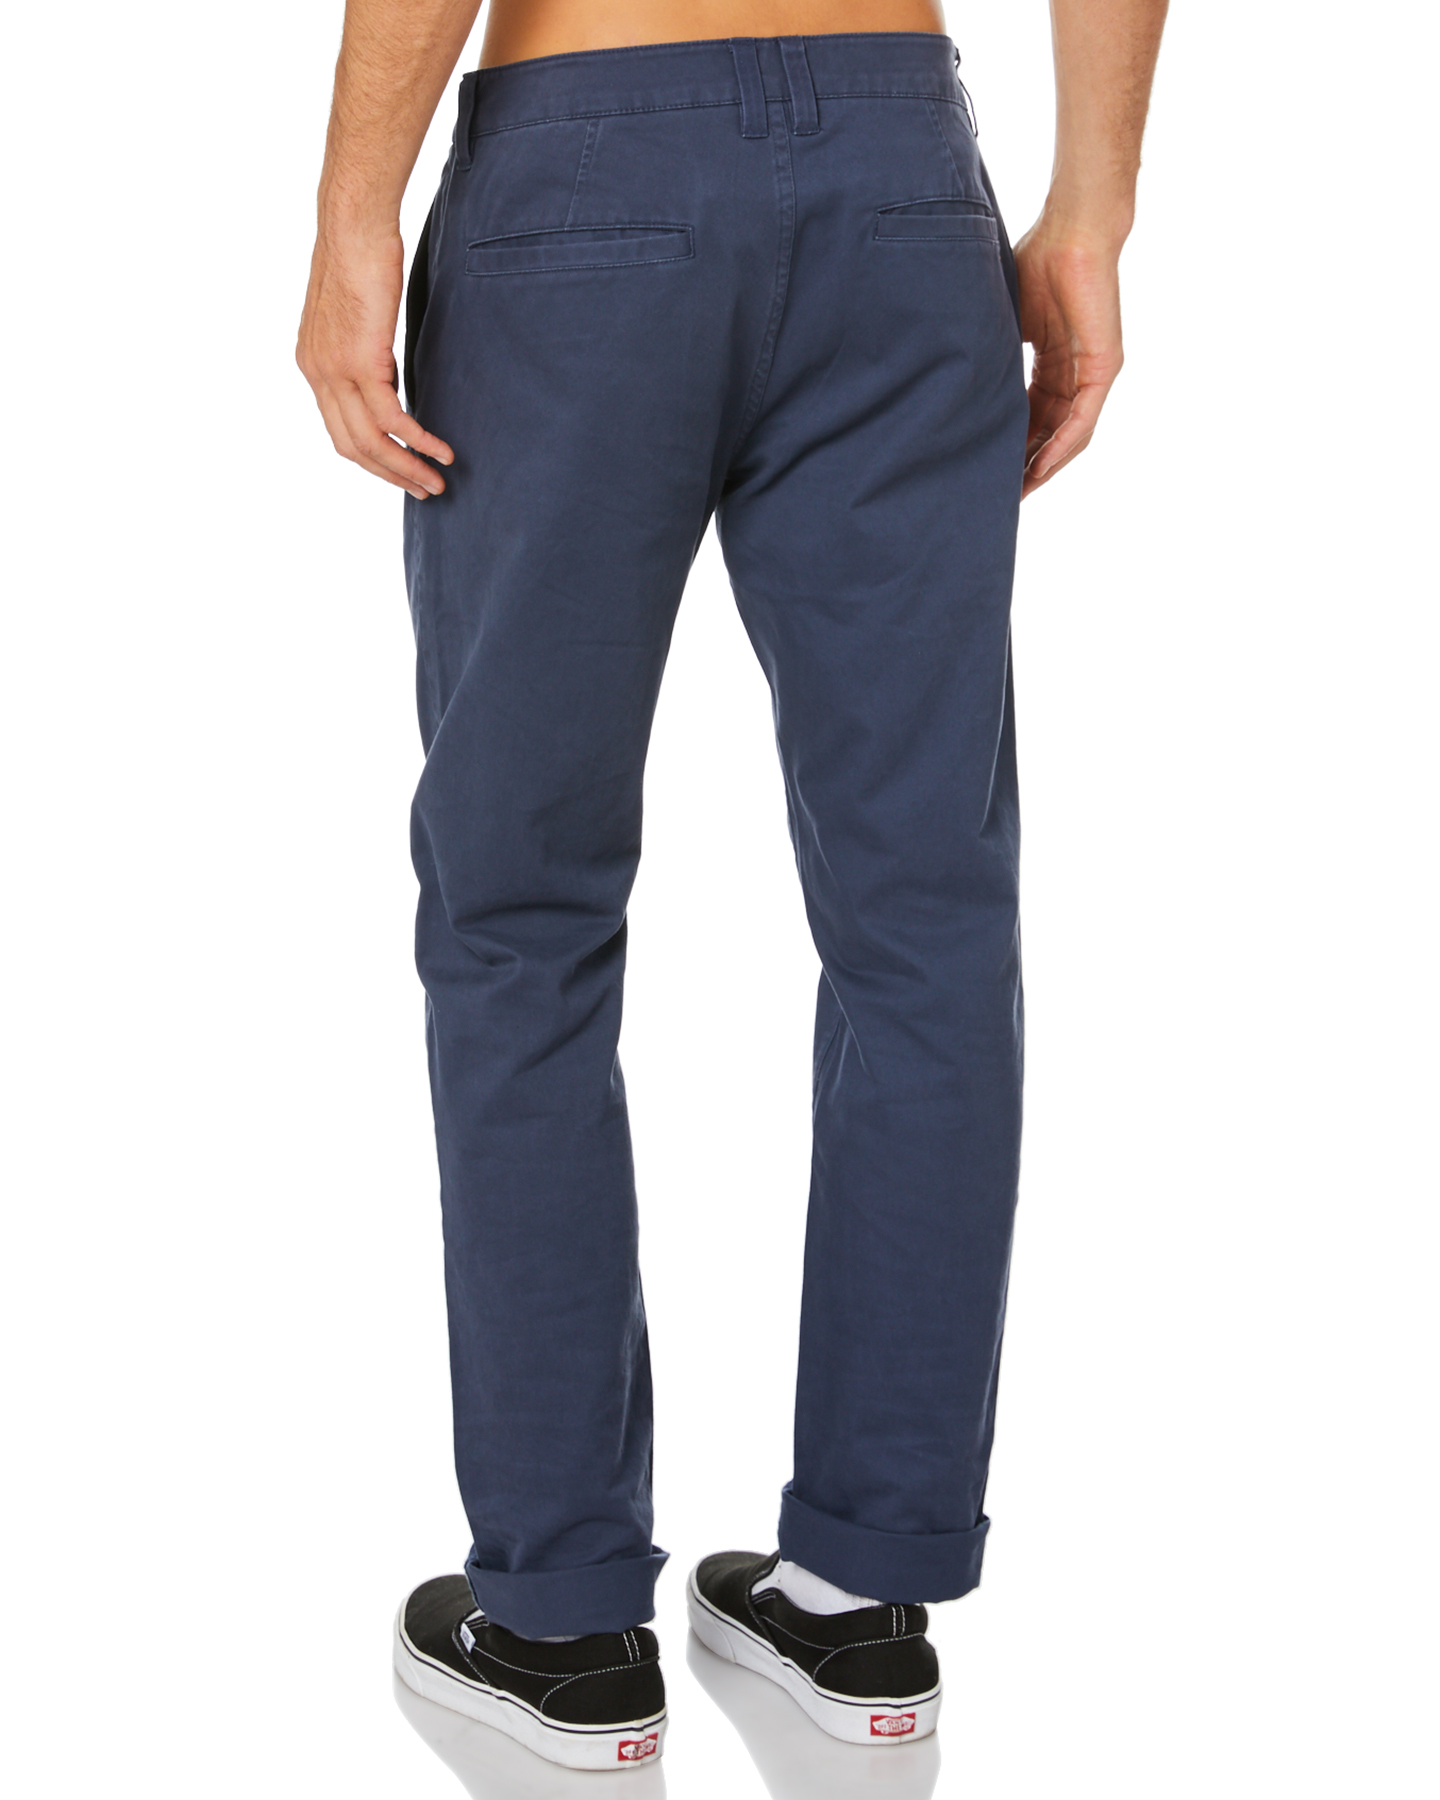 Rip Curl Epic Mens Pant - Navy | SurfStitch